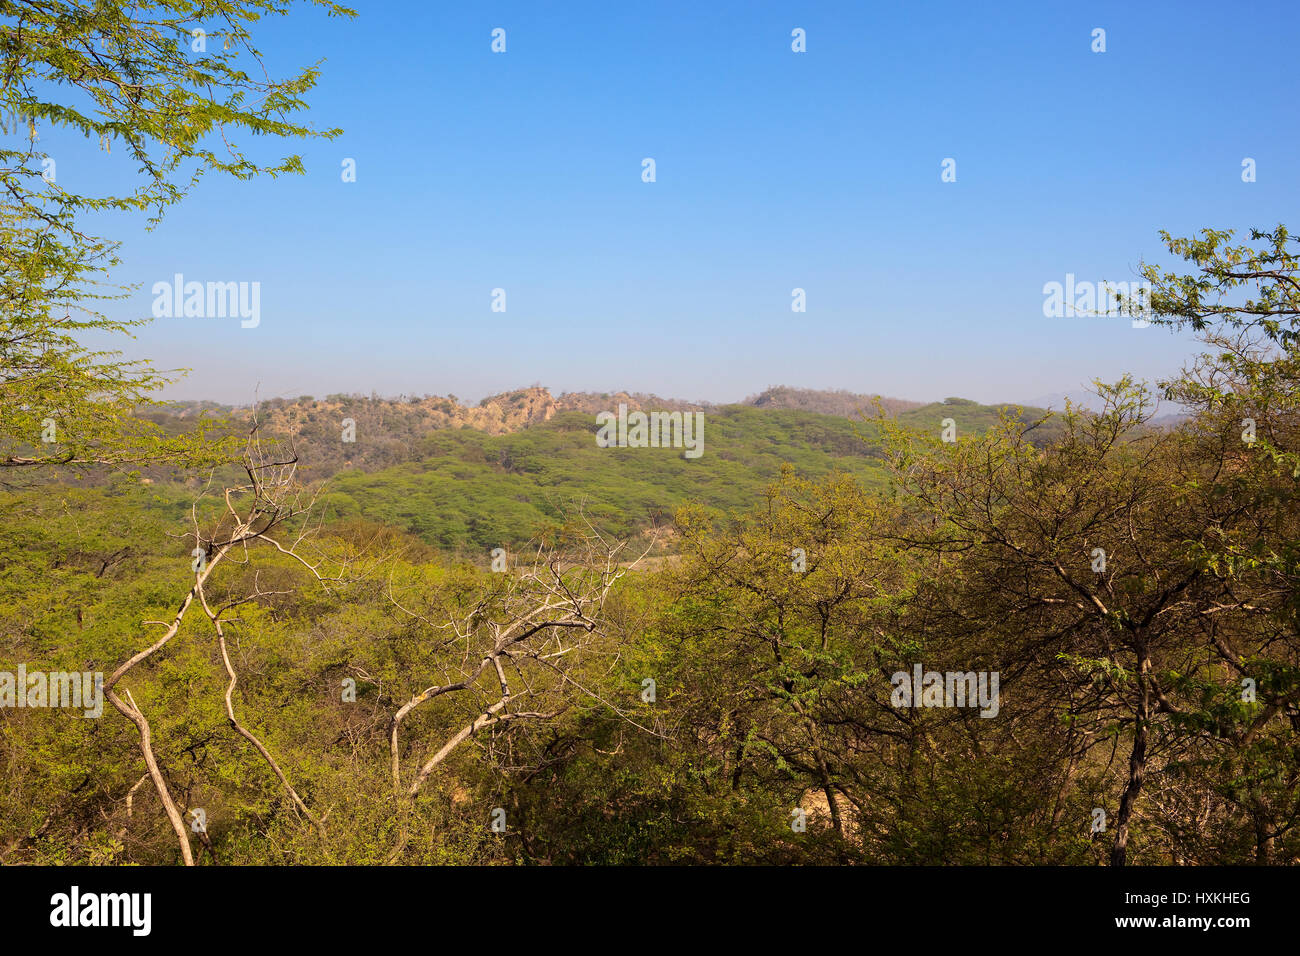 lush green acacia wooded landscape;of morni hills in chandigarh punjab india with sandy rock faces under a blue sky Stock Photo